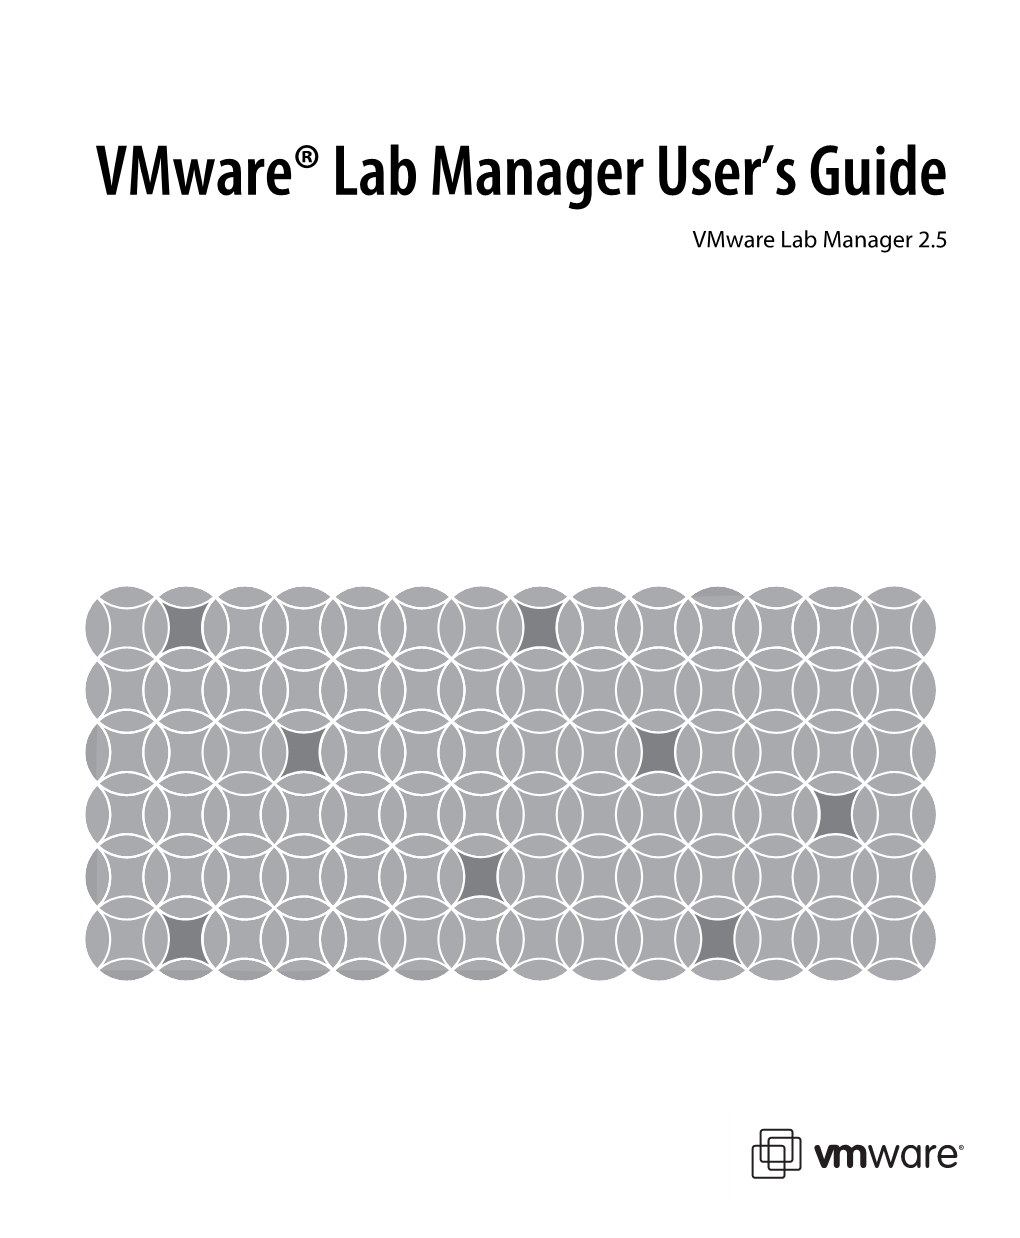 Vmware Lab Manager User's Guide